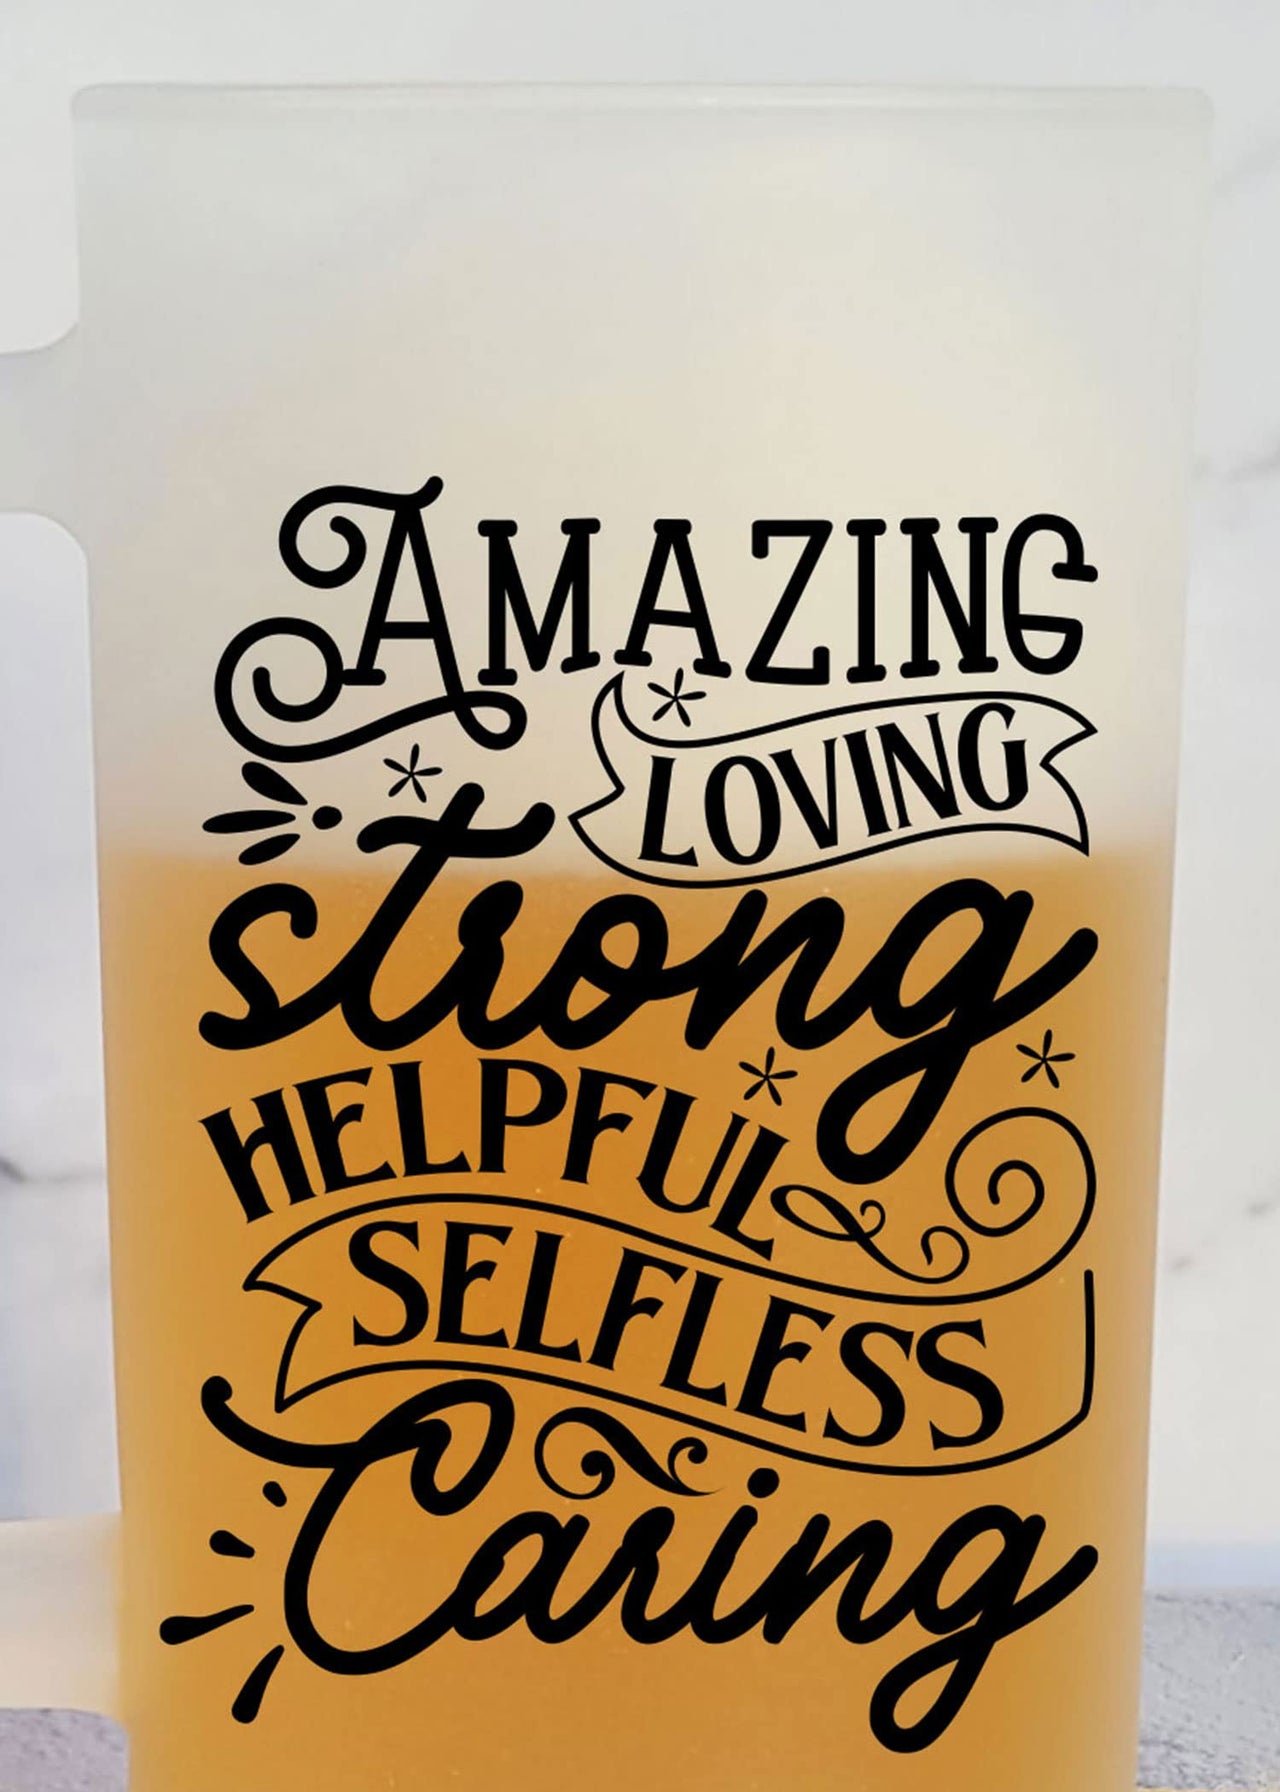 Amazing Loving Strong Helpful Selfless Caring - Frosted Beer Mug